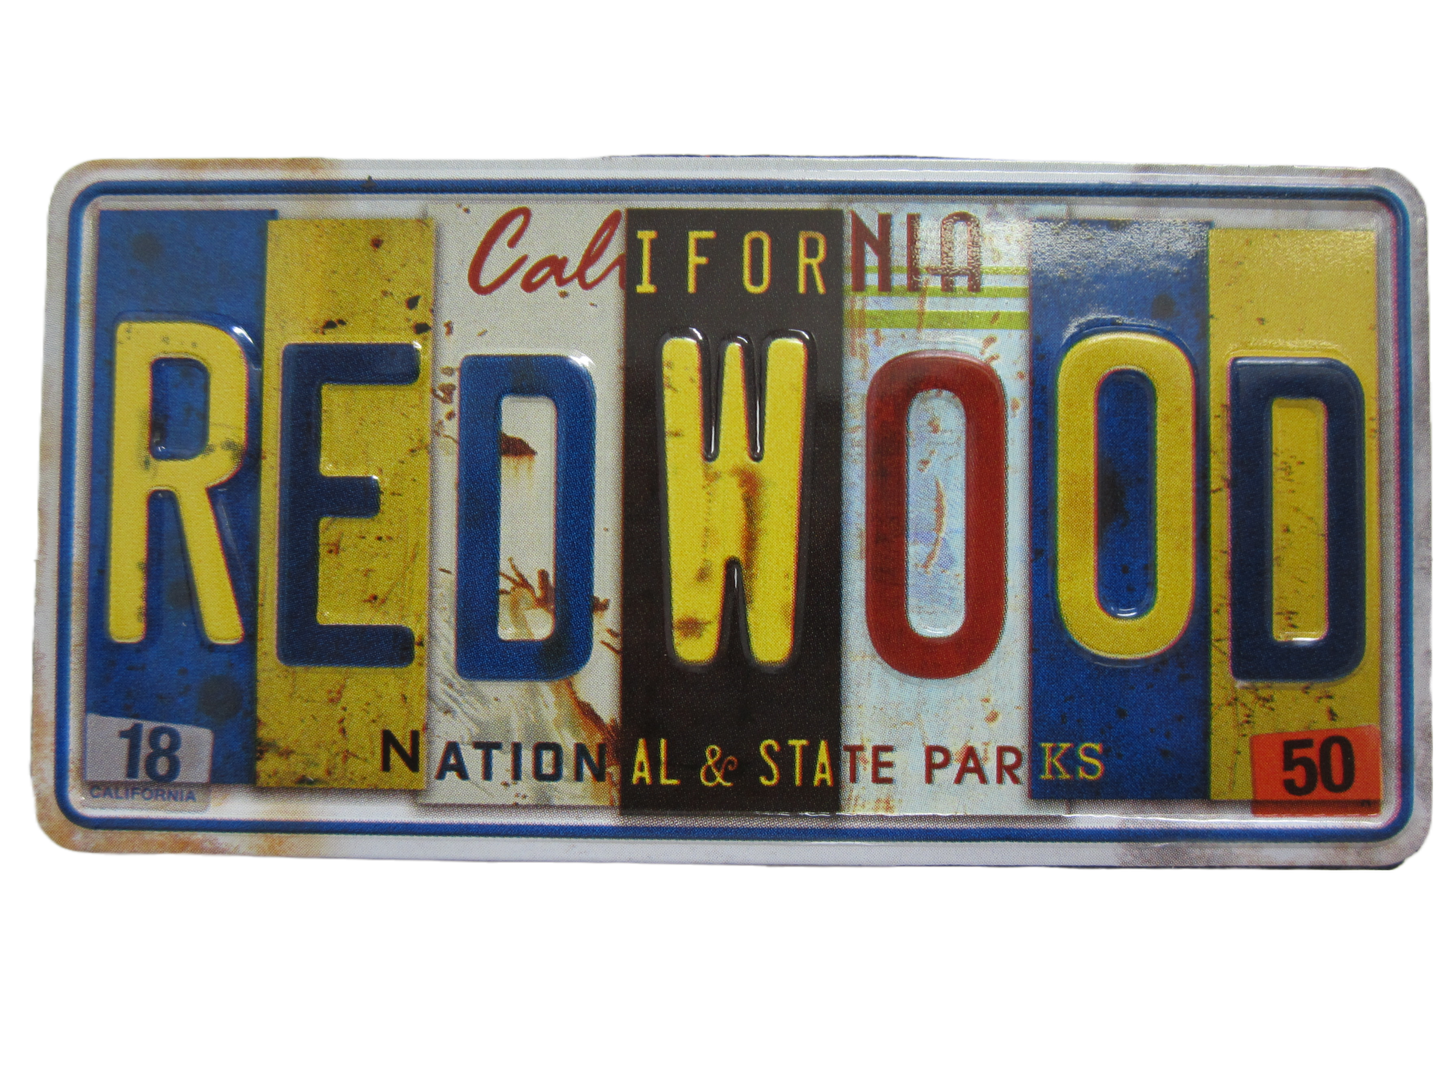 California Redwood National & State Parks Tin License Plate Magnet